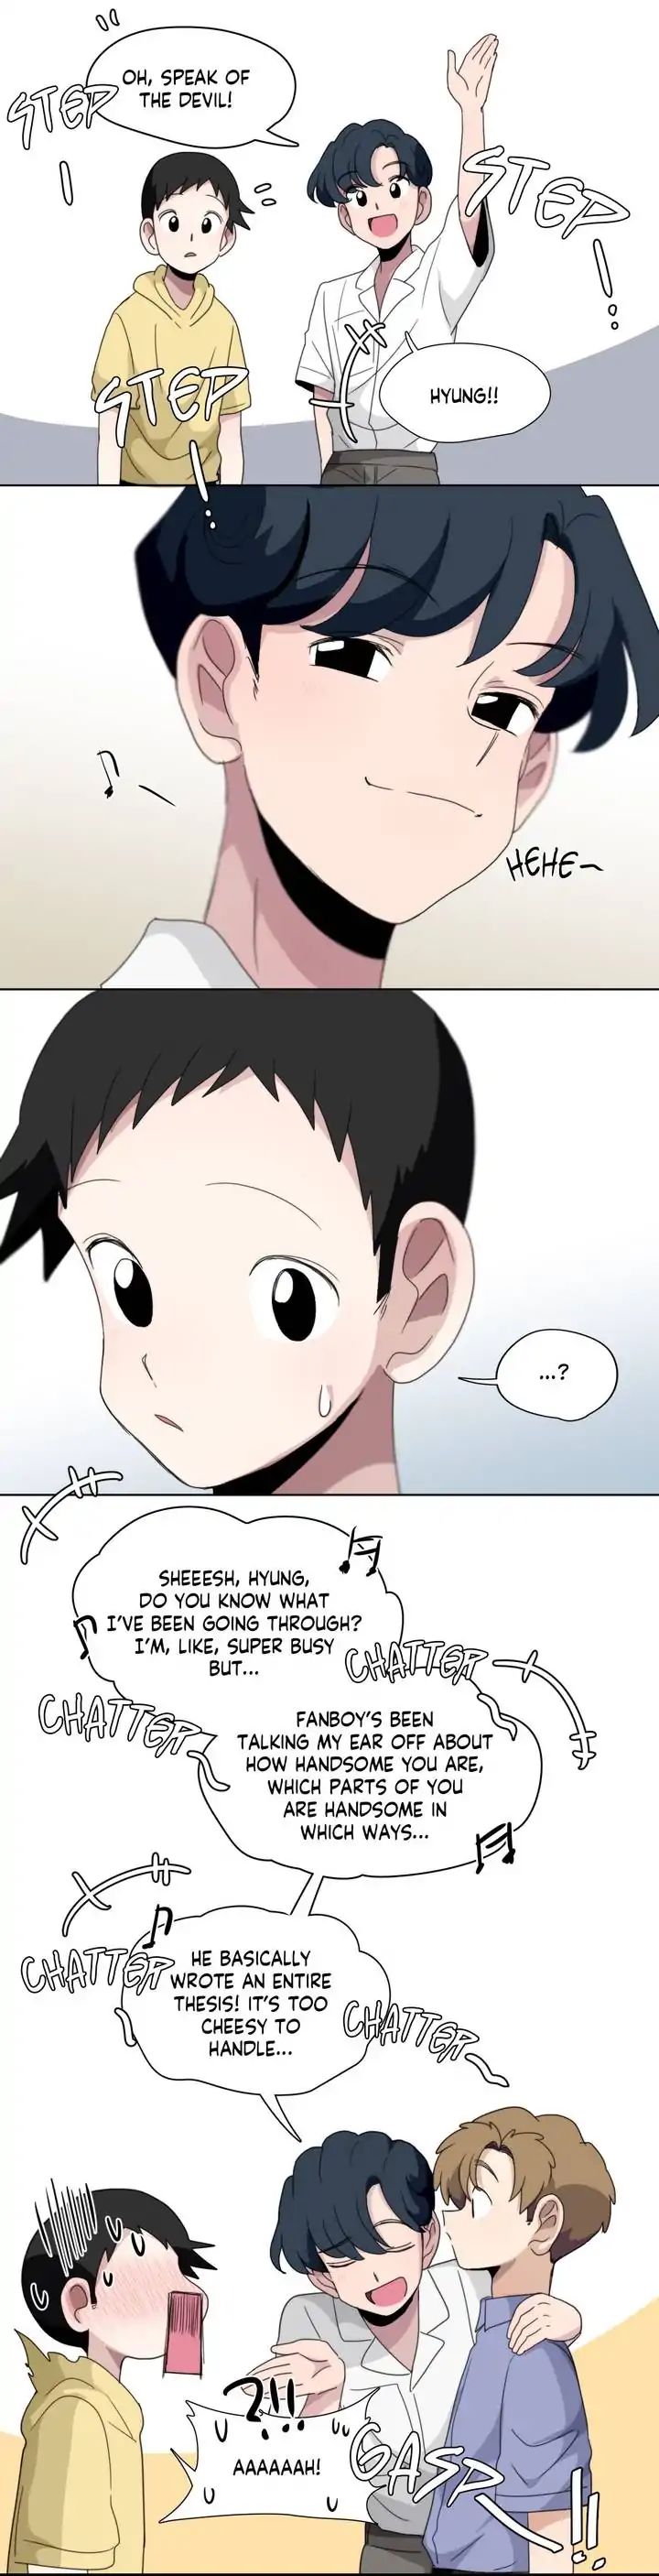 Star x Fanboy - chapter 119 - #3